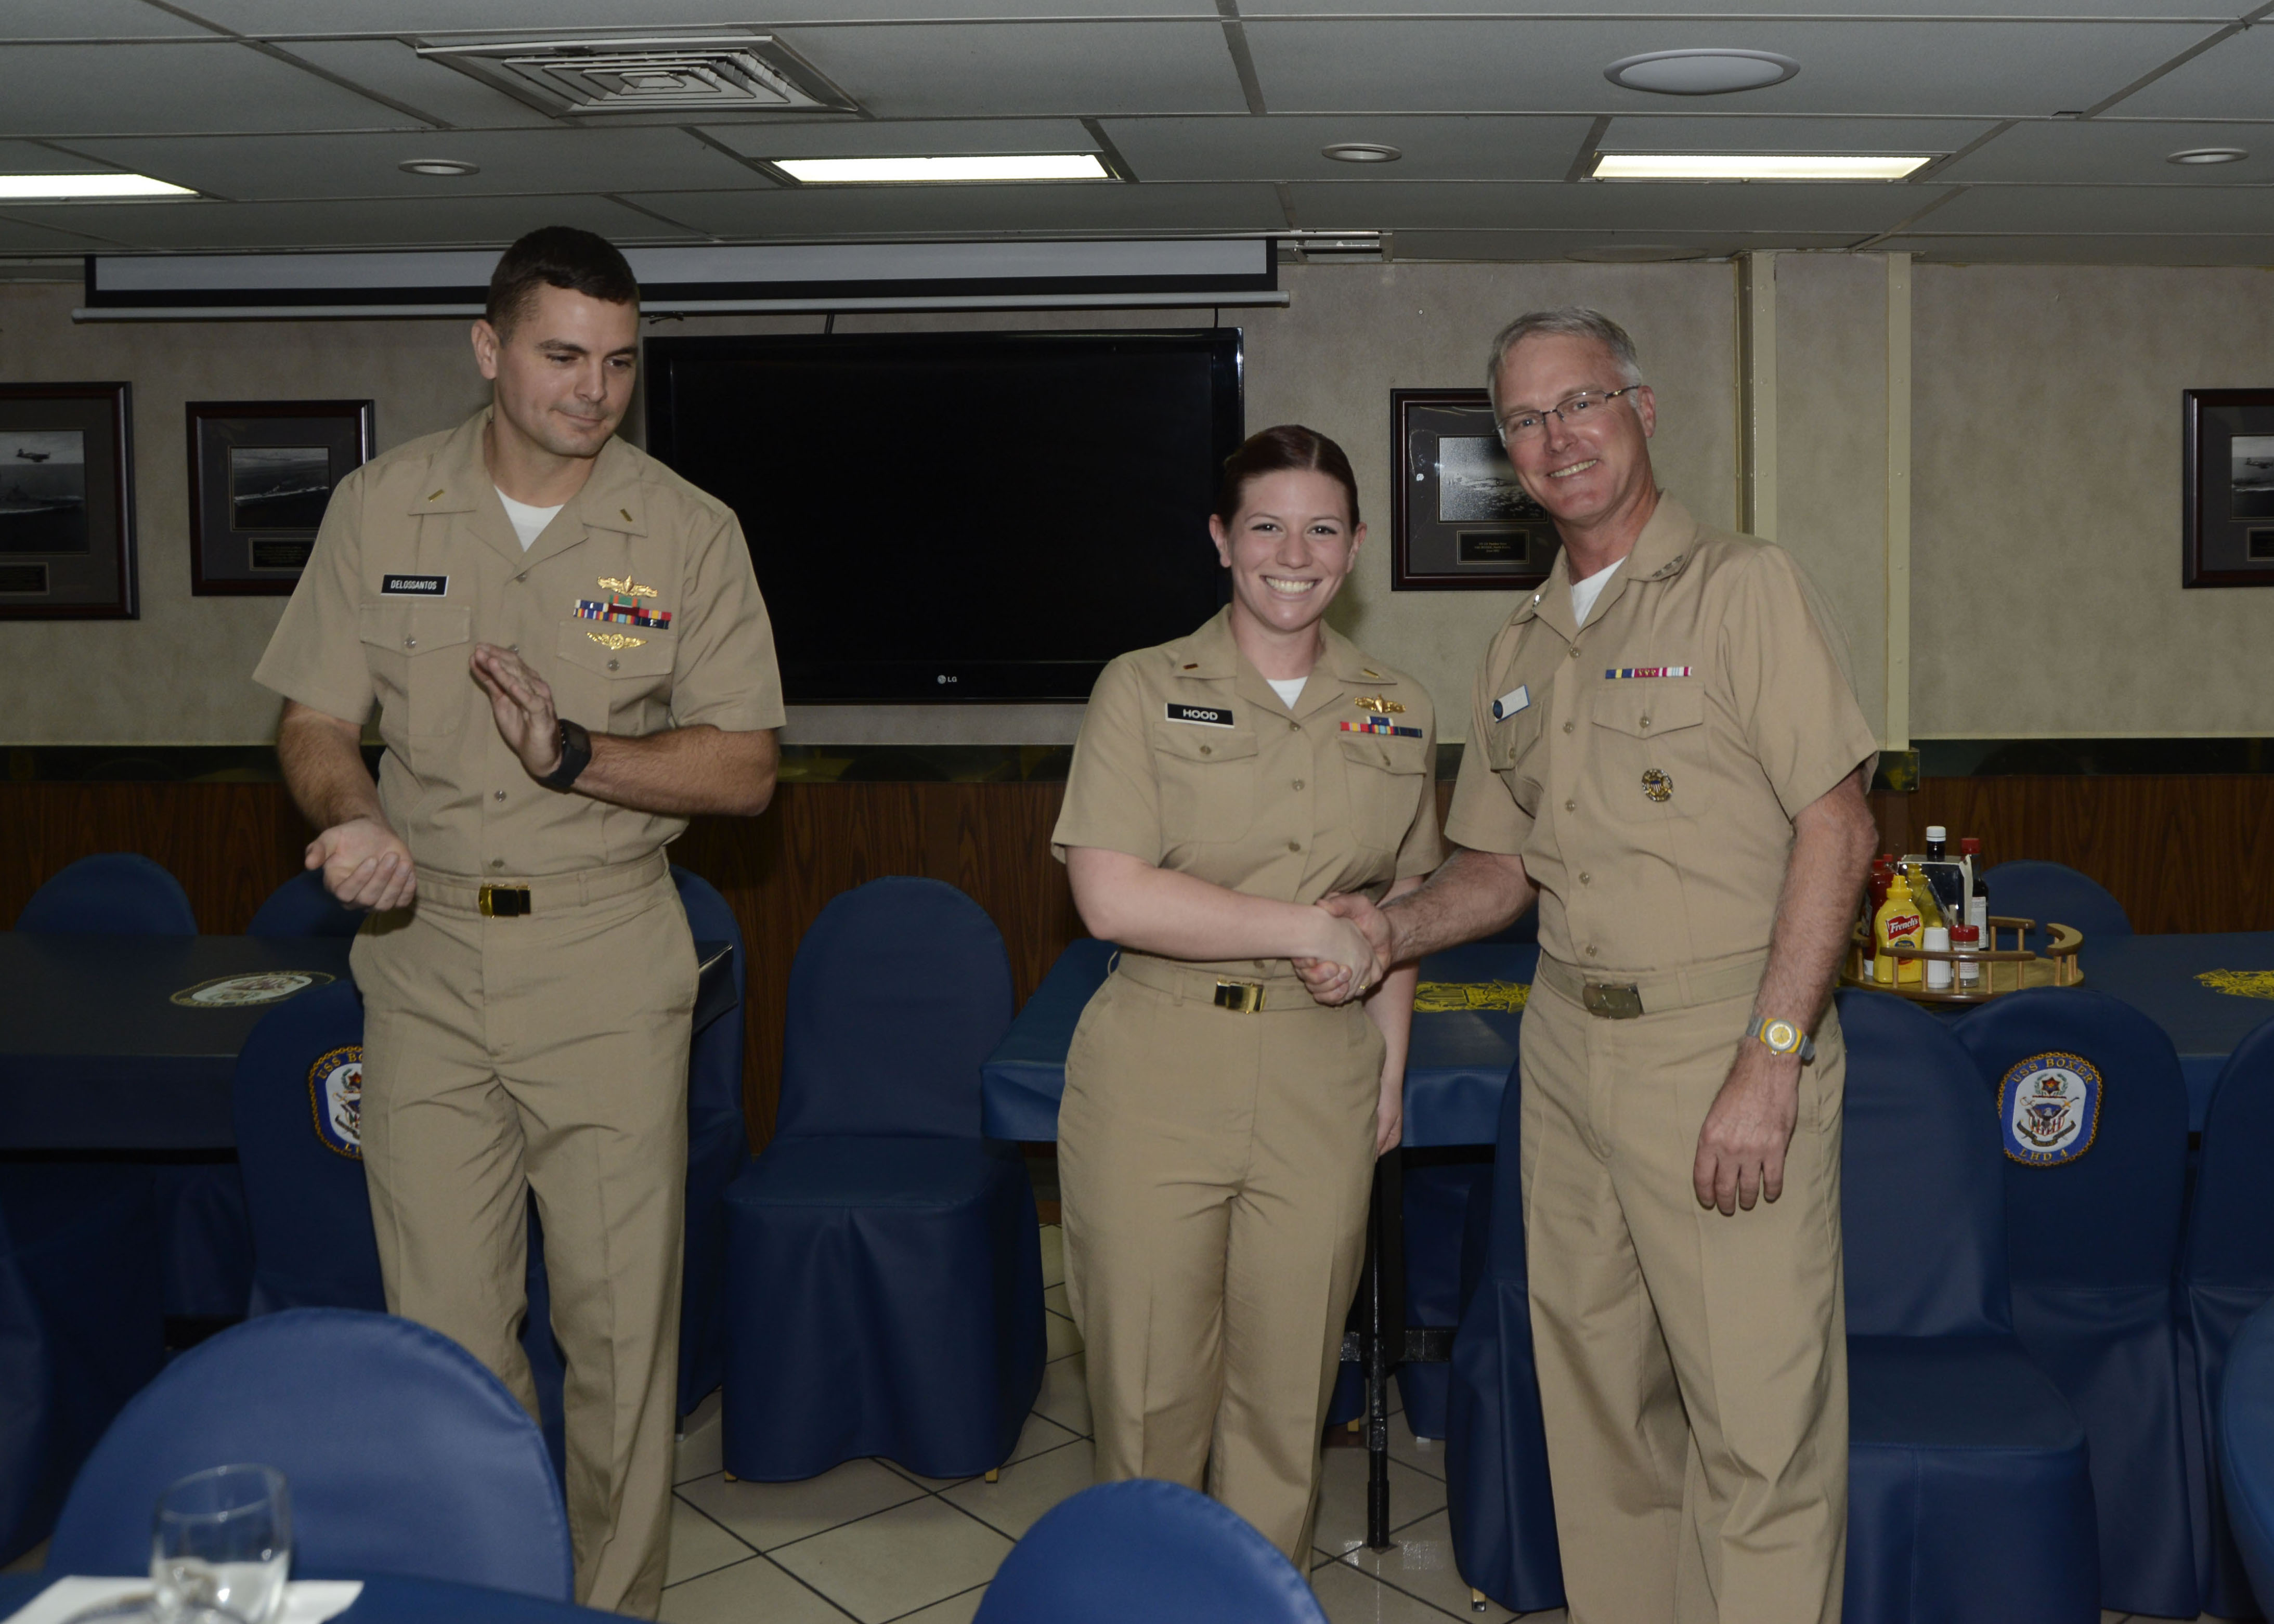 SAN DIEGO (Feb. 9, 2015) - Ens. Lauren Hood, Operations Intelligence Division Officer for the amphibious assault ship USS Boxer (LHD 4) is awarded her Surface Warfare Officer pin by Vice Adm. Thomas S. Rowden, Commander, Naval Surface Forces, in Boxer's wardroom. Boxer is currently undergoing a planned maintenance availability in San Diego. (U.S. Navy photo by Mass Communication Specialist 2nd Class Briana Taylor/Released)